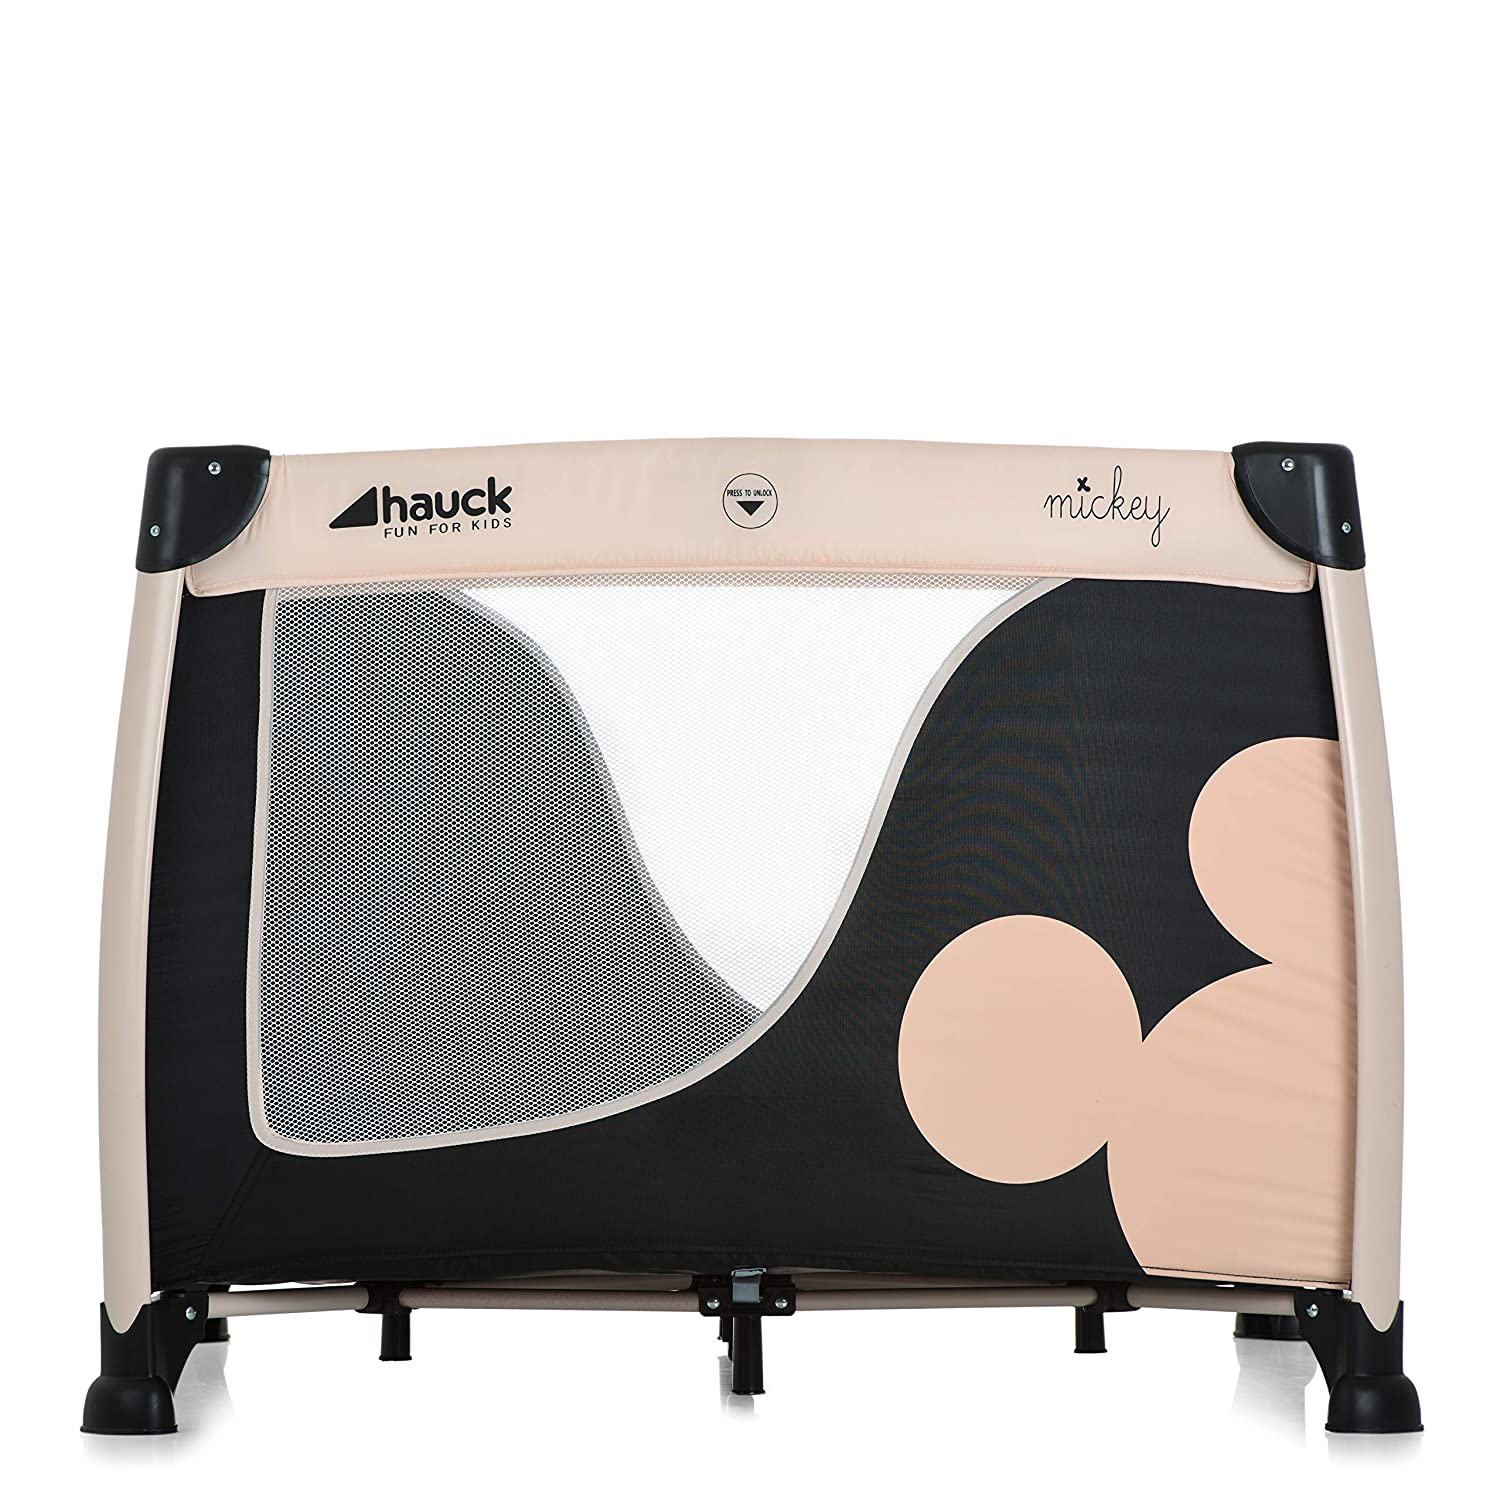 Hauck 606117 Sleep N Play SQ Lightweight Square Baby Playpen, Travel Bed with Mattress and Bag, Foldable and Portable, 90 x 90 cm